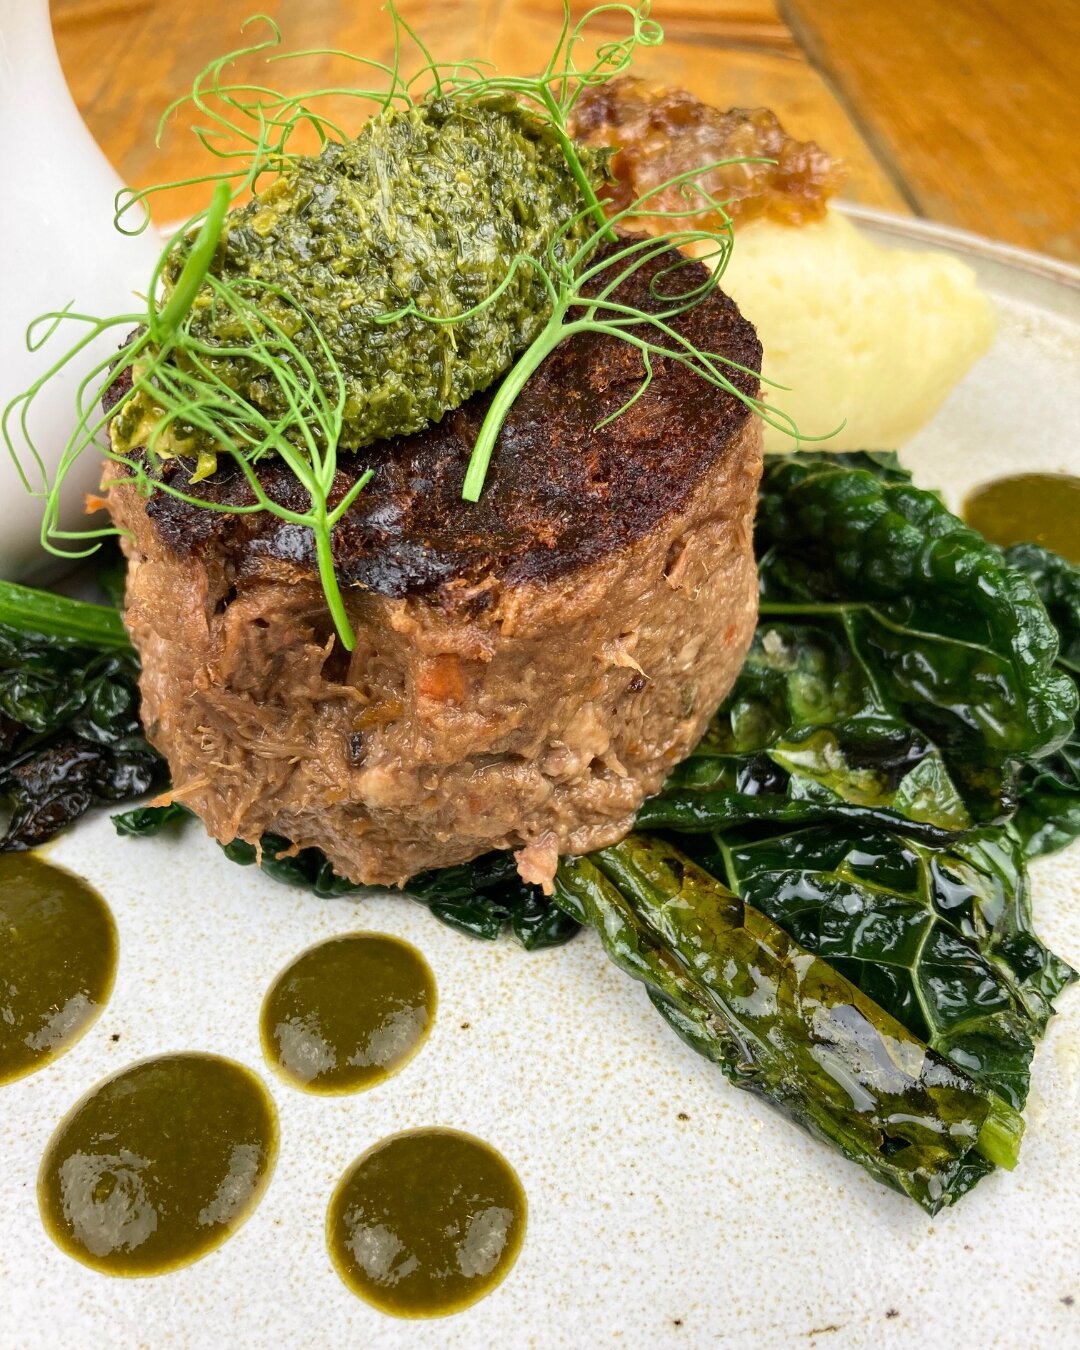 Slow-cooked shoulder of lamb, buttermilk mash, salsa verde, parsley puree, cavolo nero 

🍲 Check out our menu and book a table (links in bio)